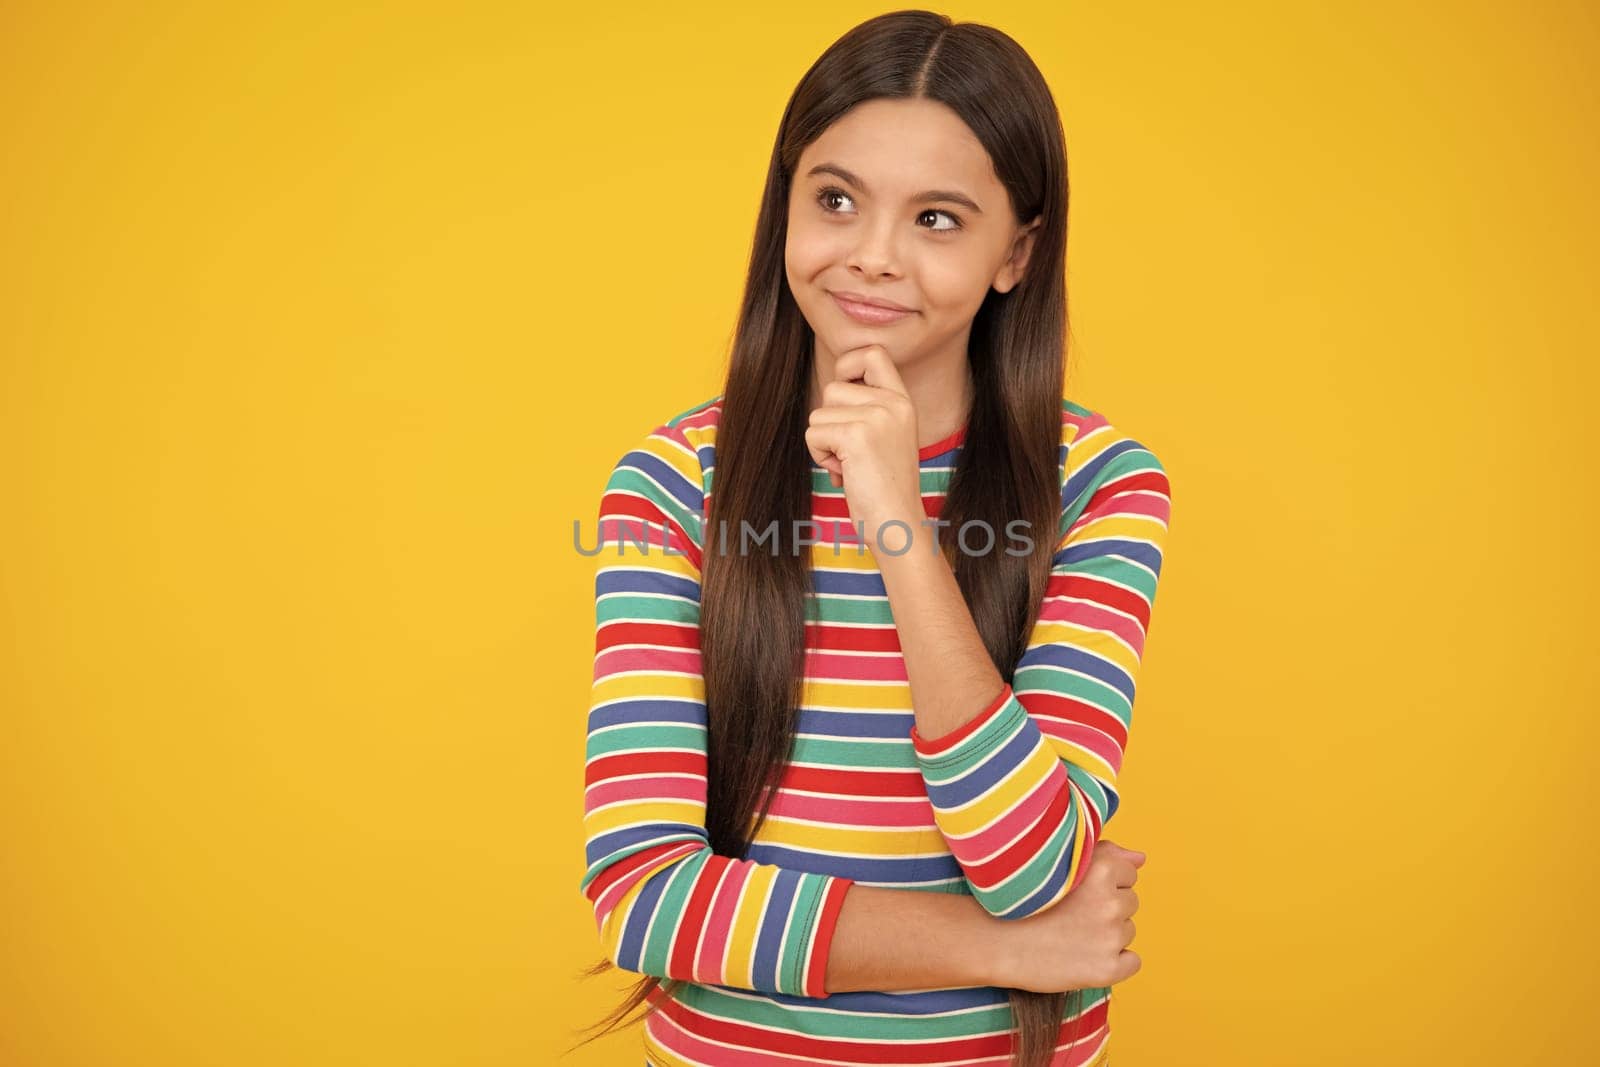 Funny face. Teenager girl 12, 13, 14 years old thinking against yellow background. Child think and creative idea concept